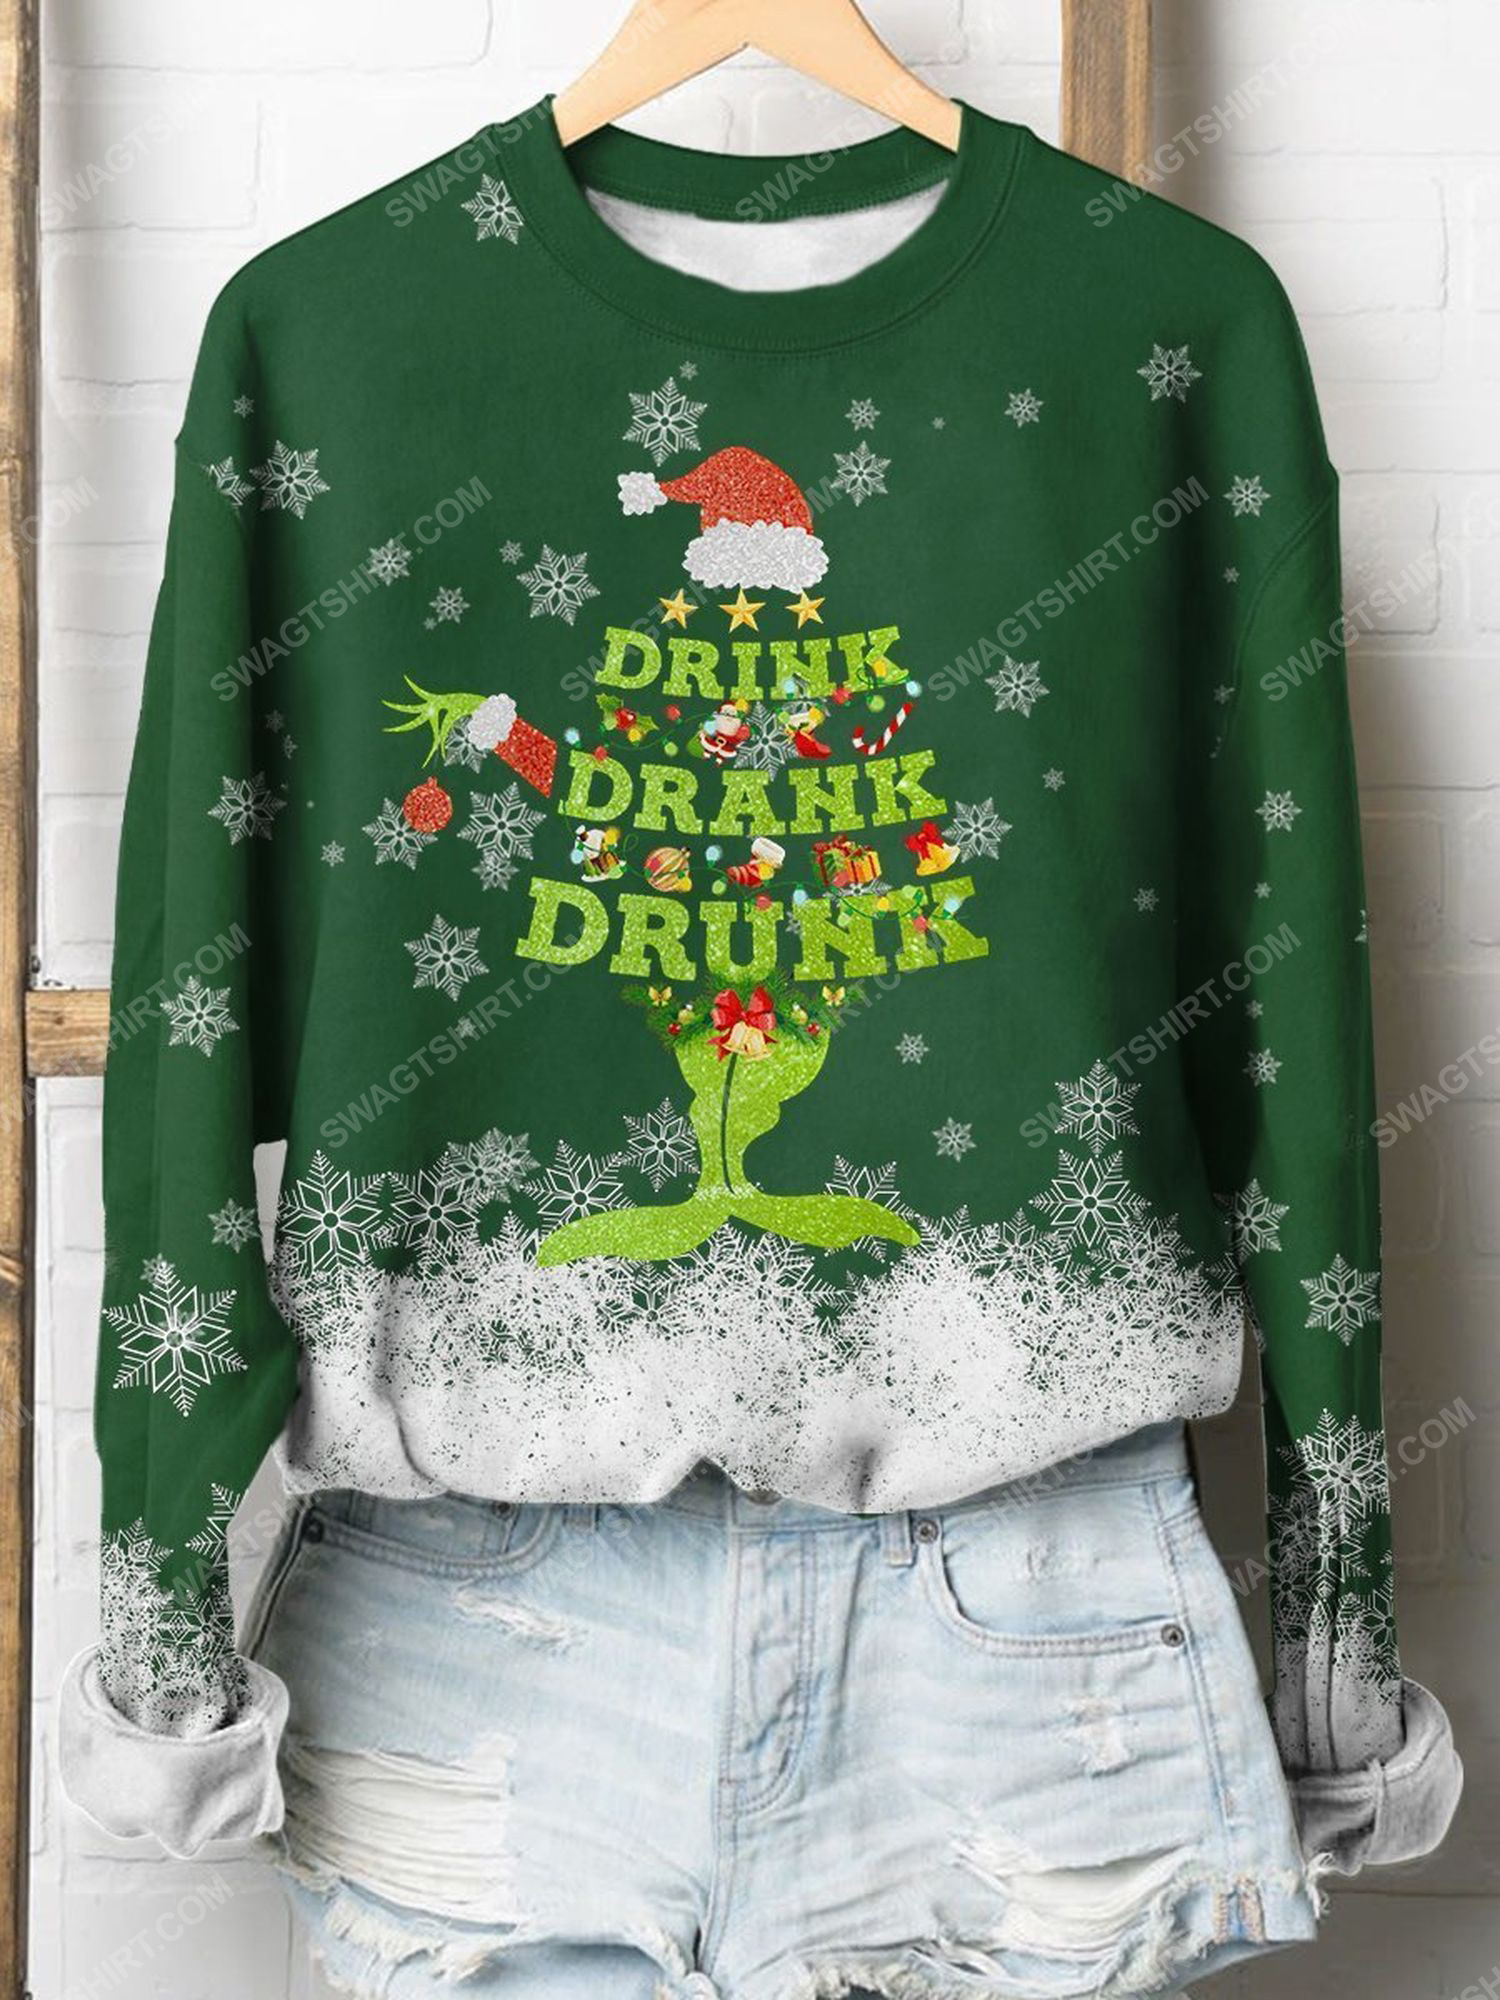 The grinch and christmas tree drink drank drunk full print shirt